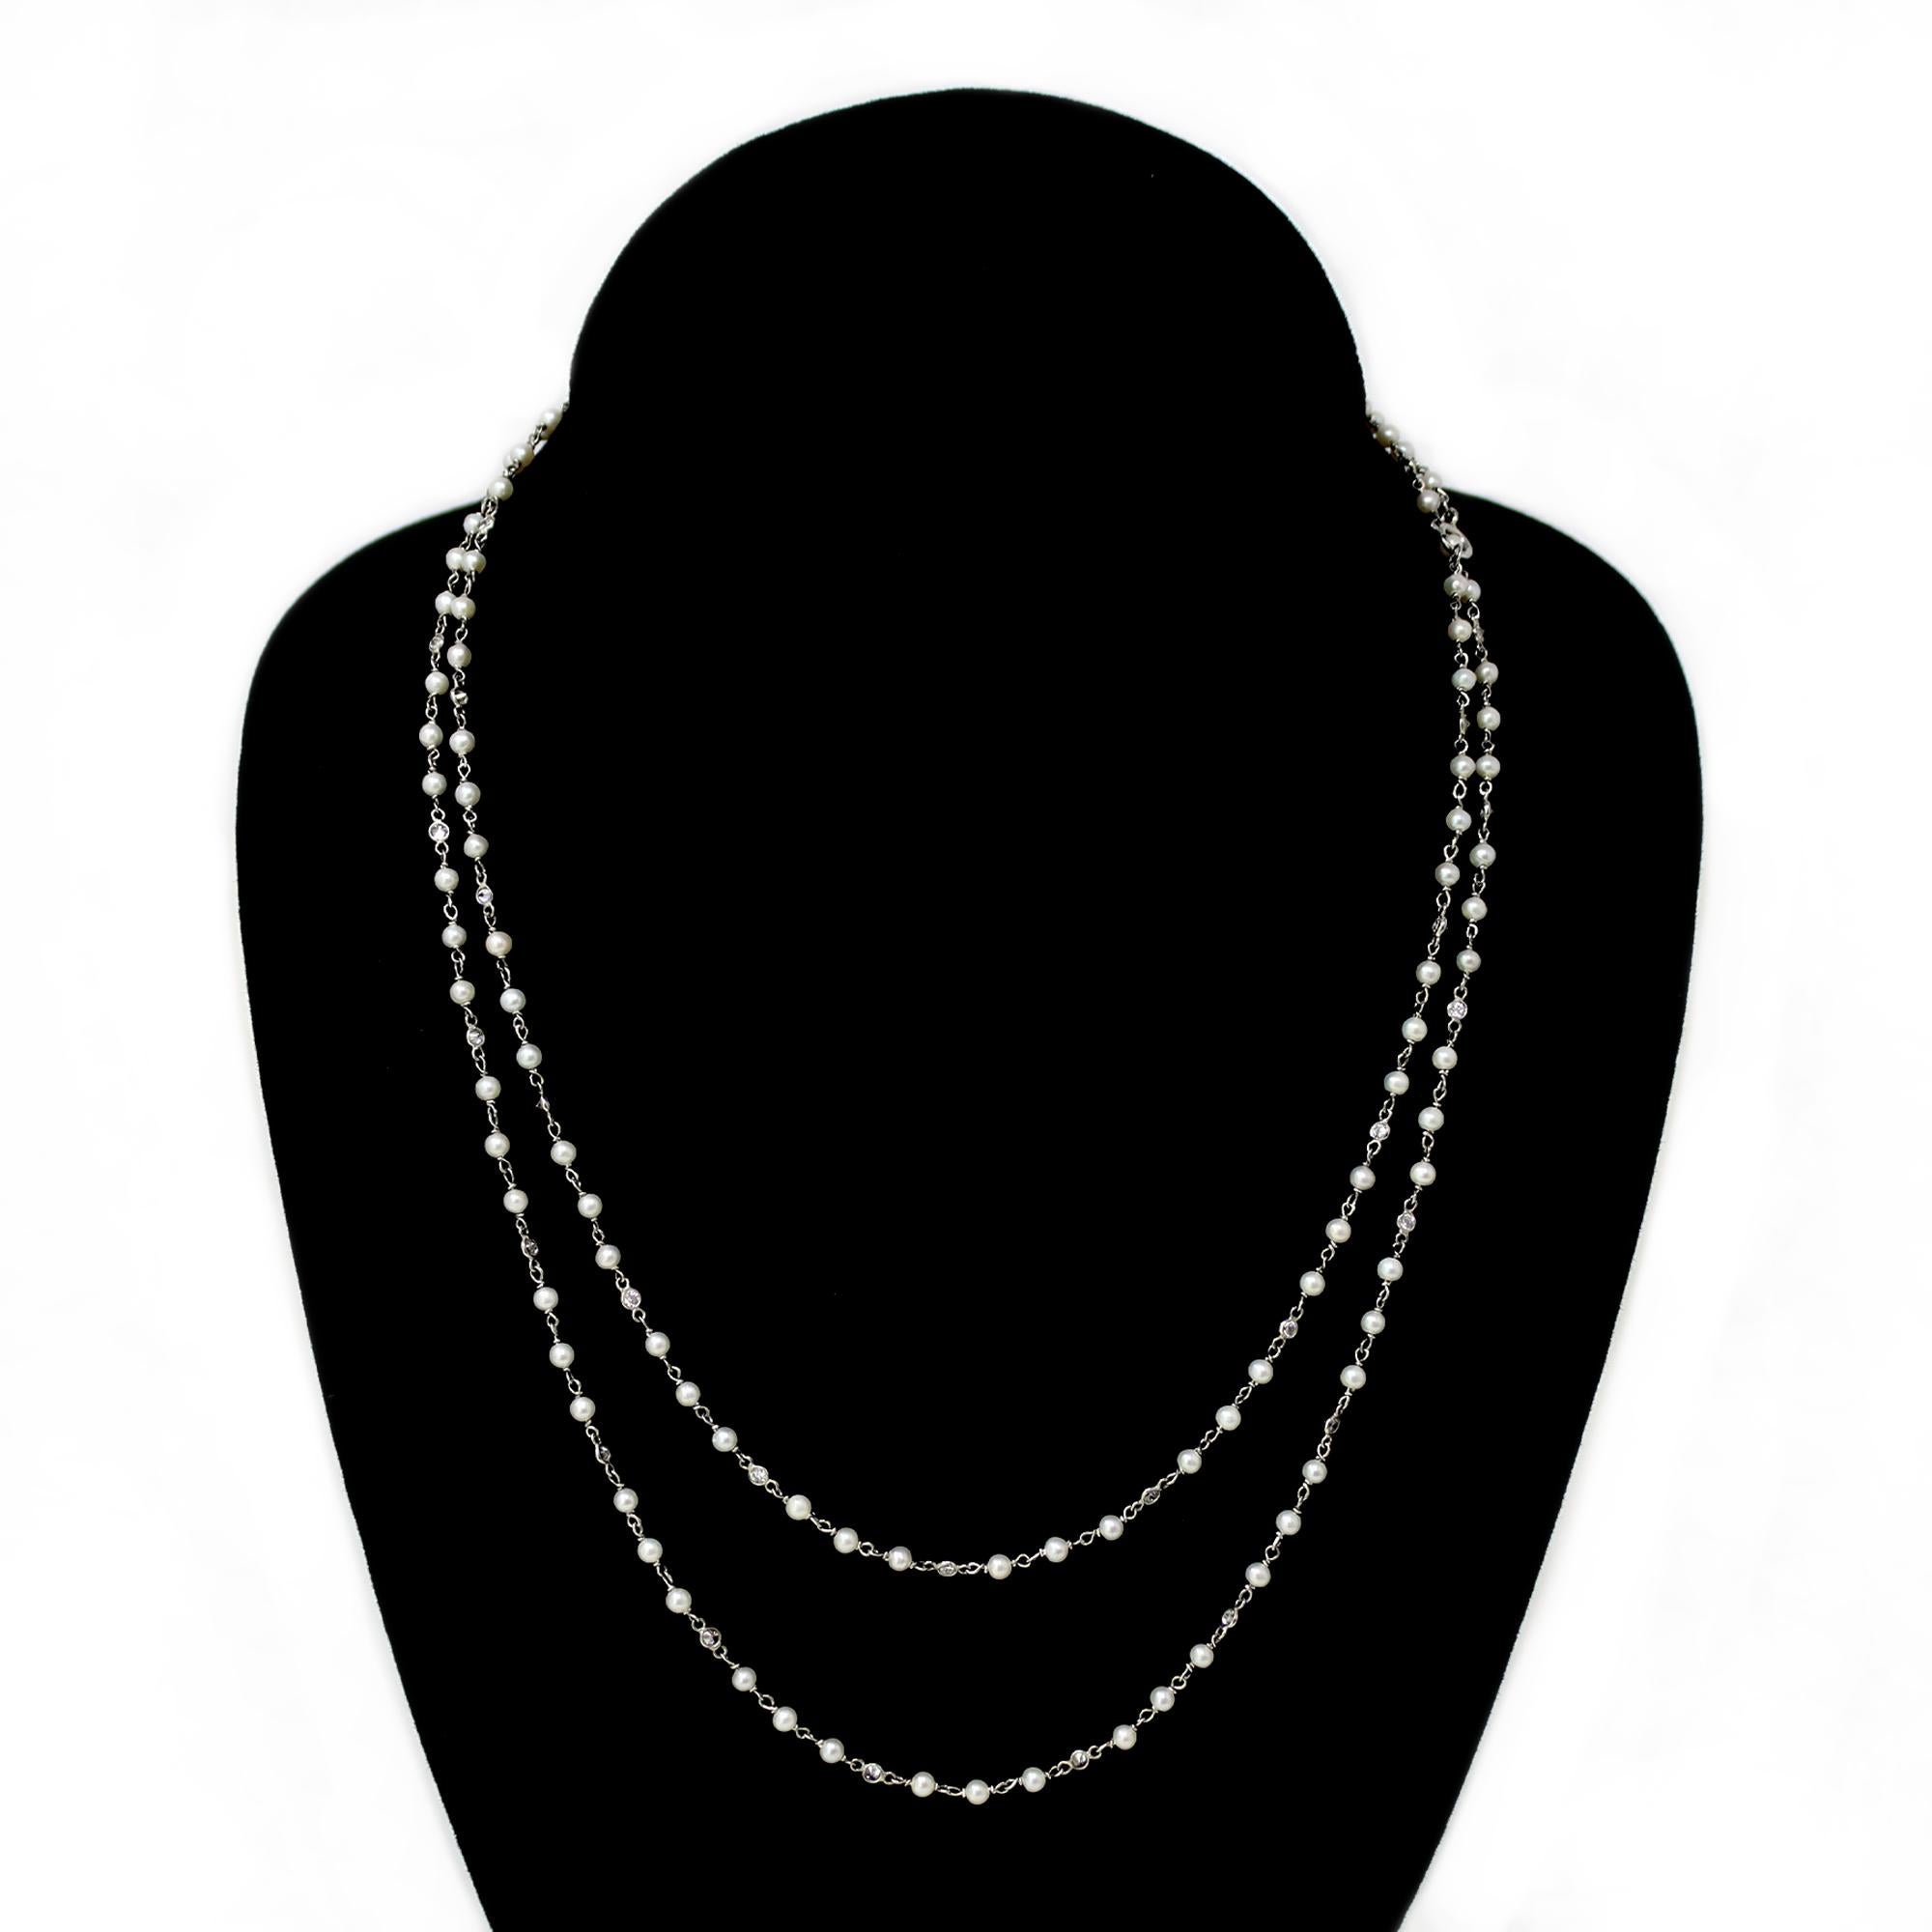 The hand made opera necklace is designed by Rosaria Varra. It features well matched seed pearls alternated with bezel set diamonds in the style of “diamond by the yard”. The necklace is created in platinum and is fully hand executed. The diamond